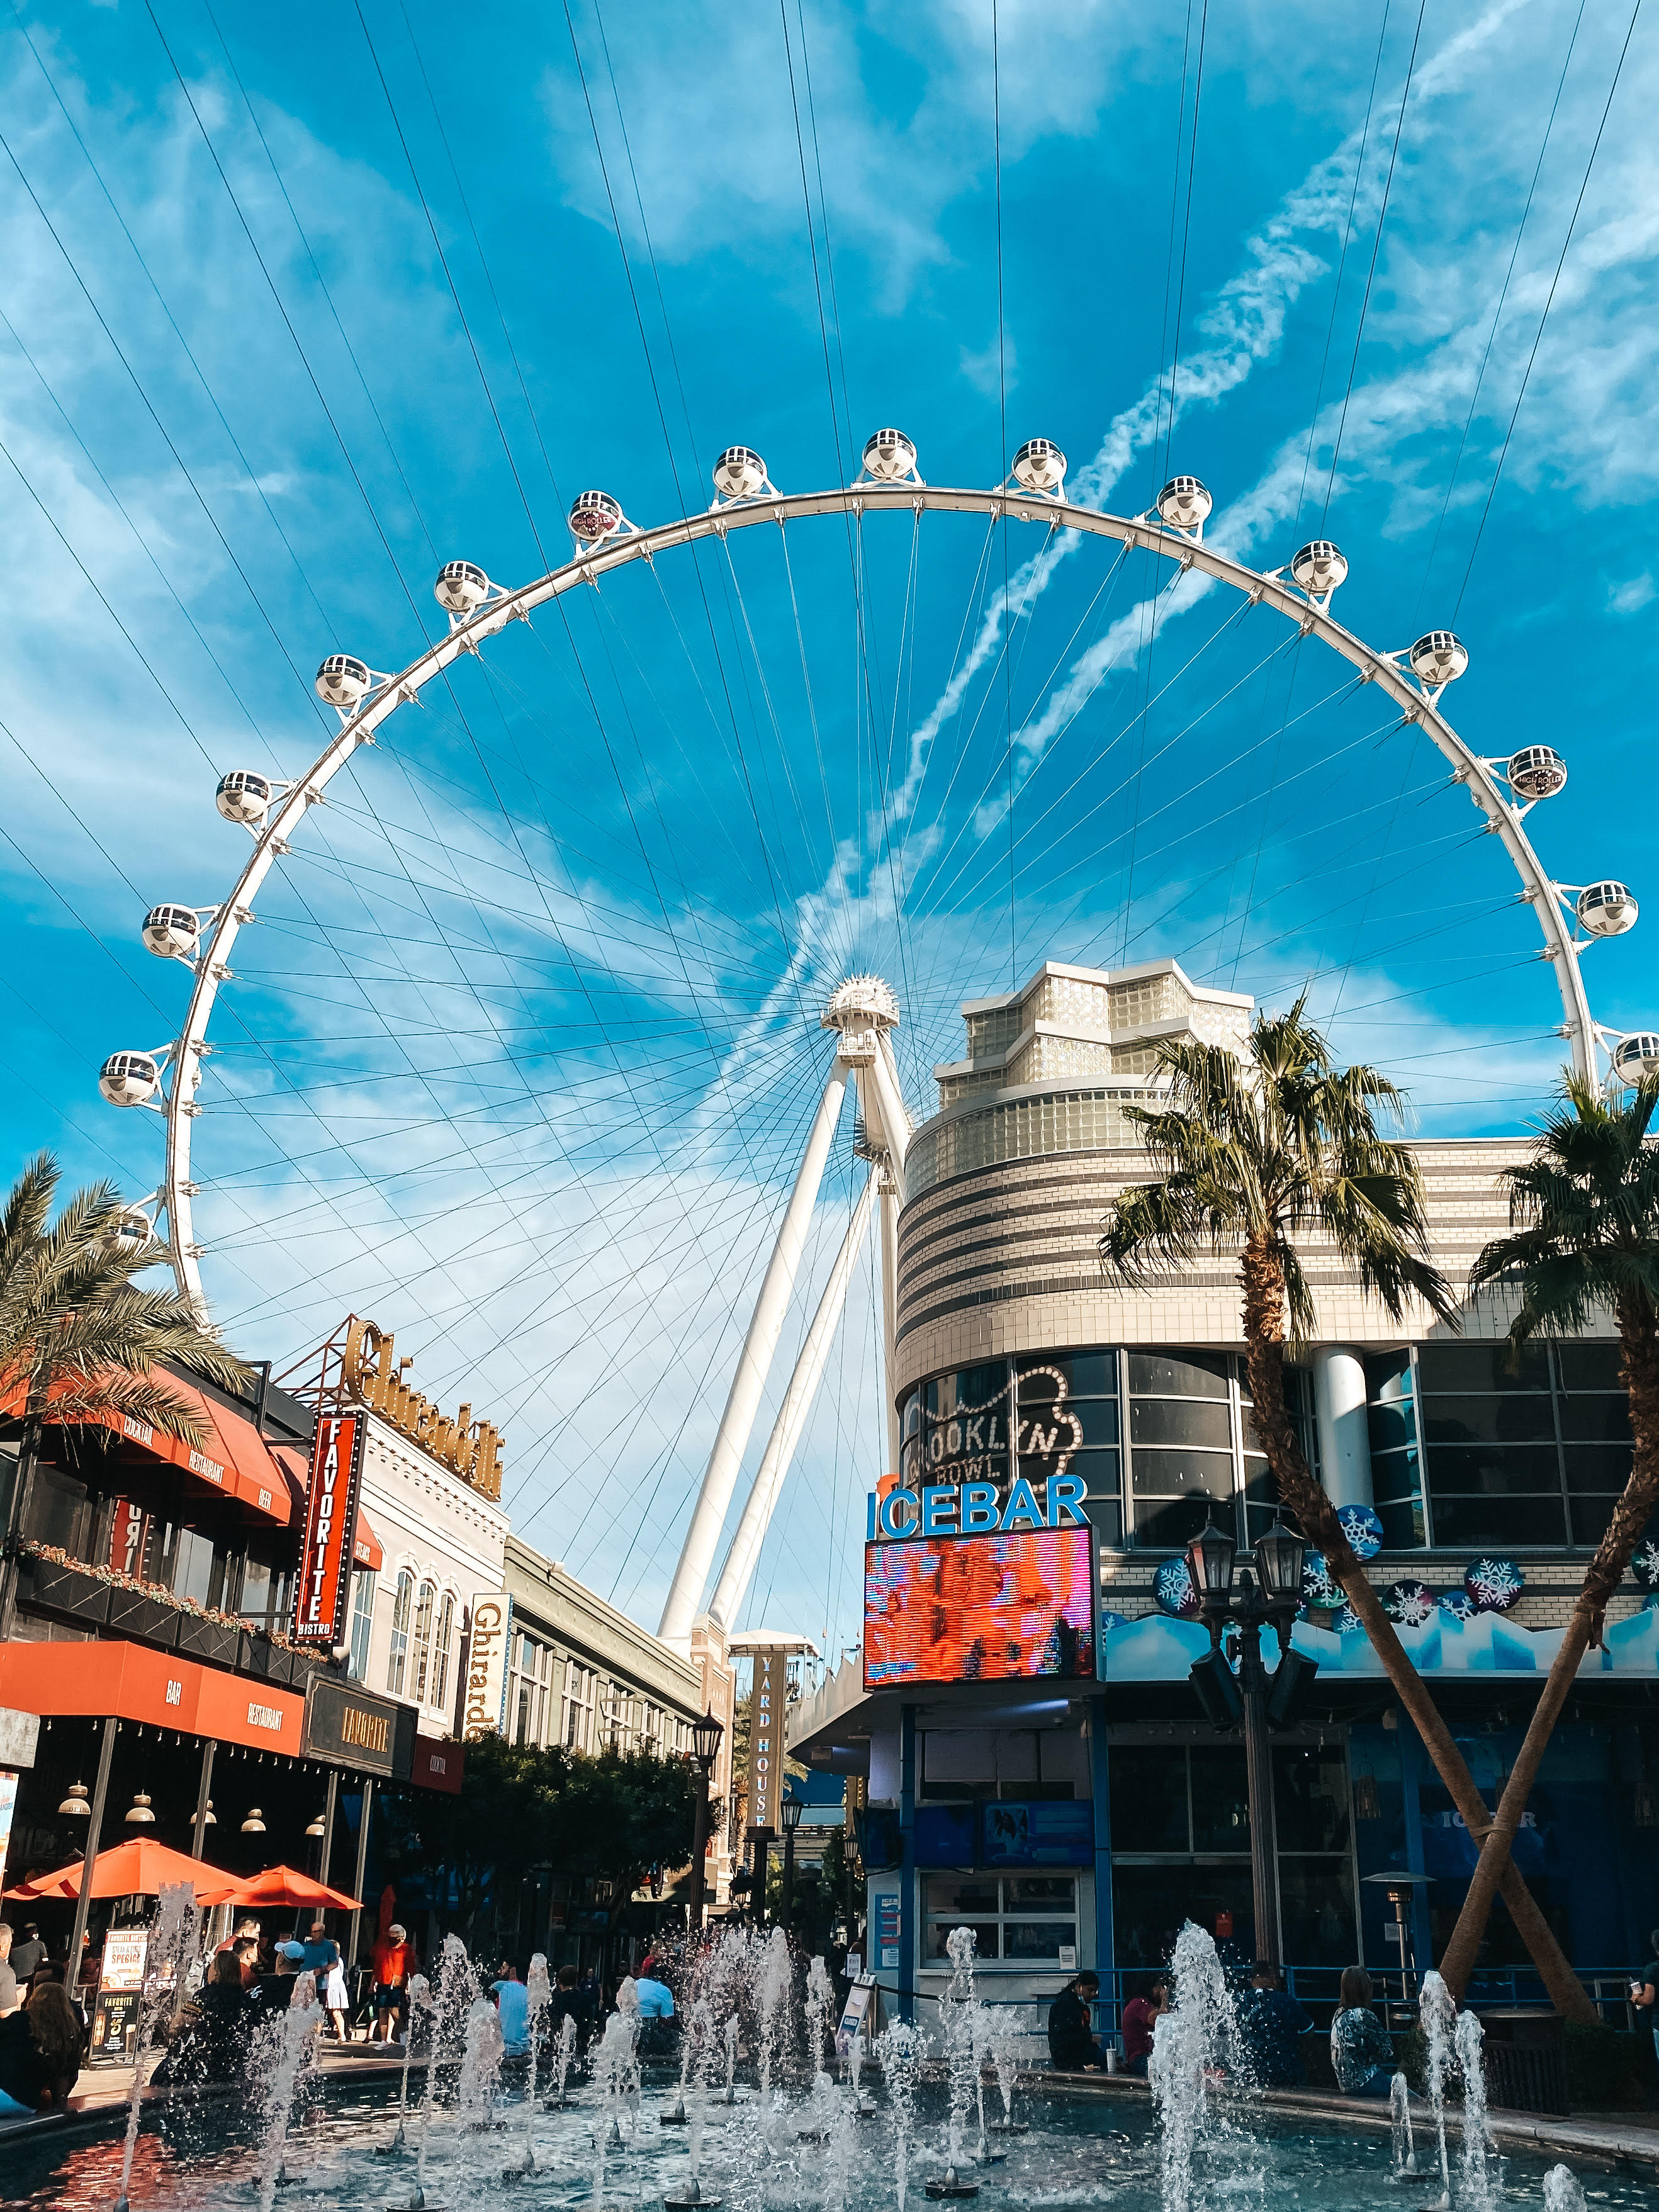 If you are looking for things to do with kids in Las Vegas, the LINQ and the LINQ Promenade is a fun place with tons of entertainment. This little street is lined with candy shops, Immersive experiences, shopping and TONS of restaurants 